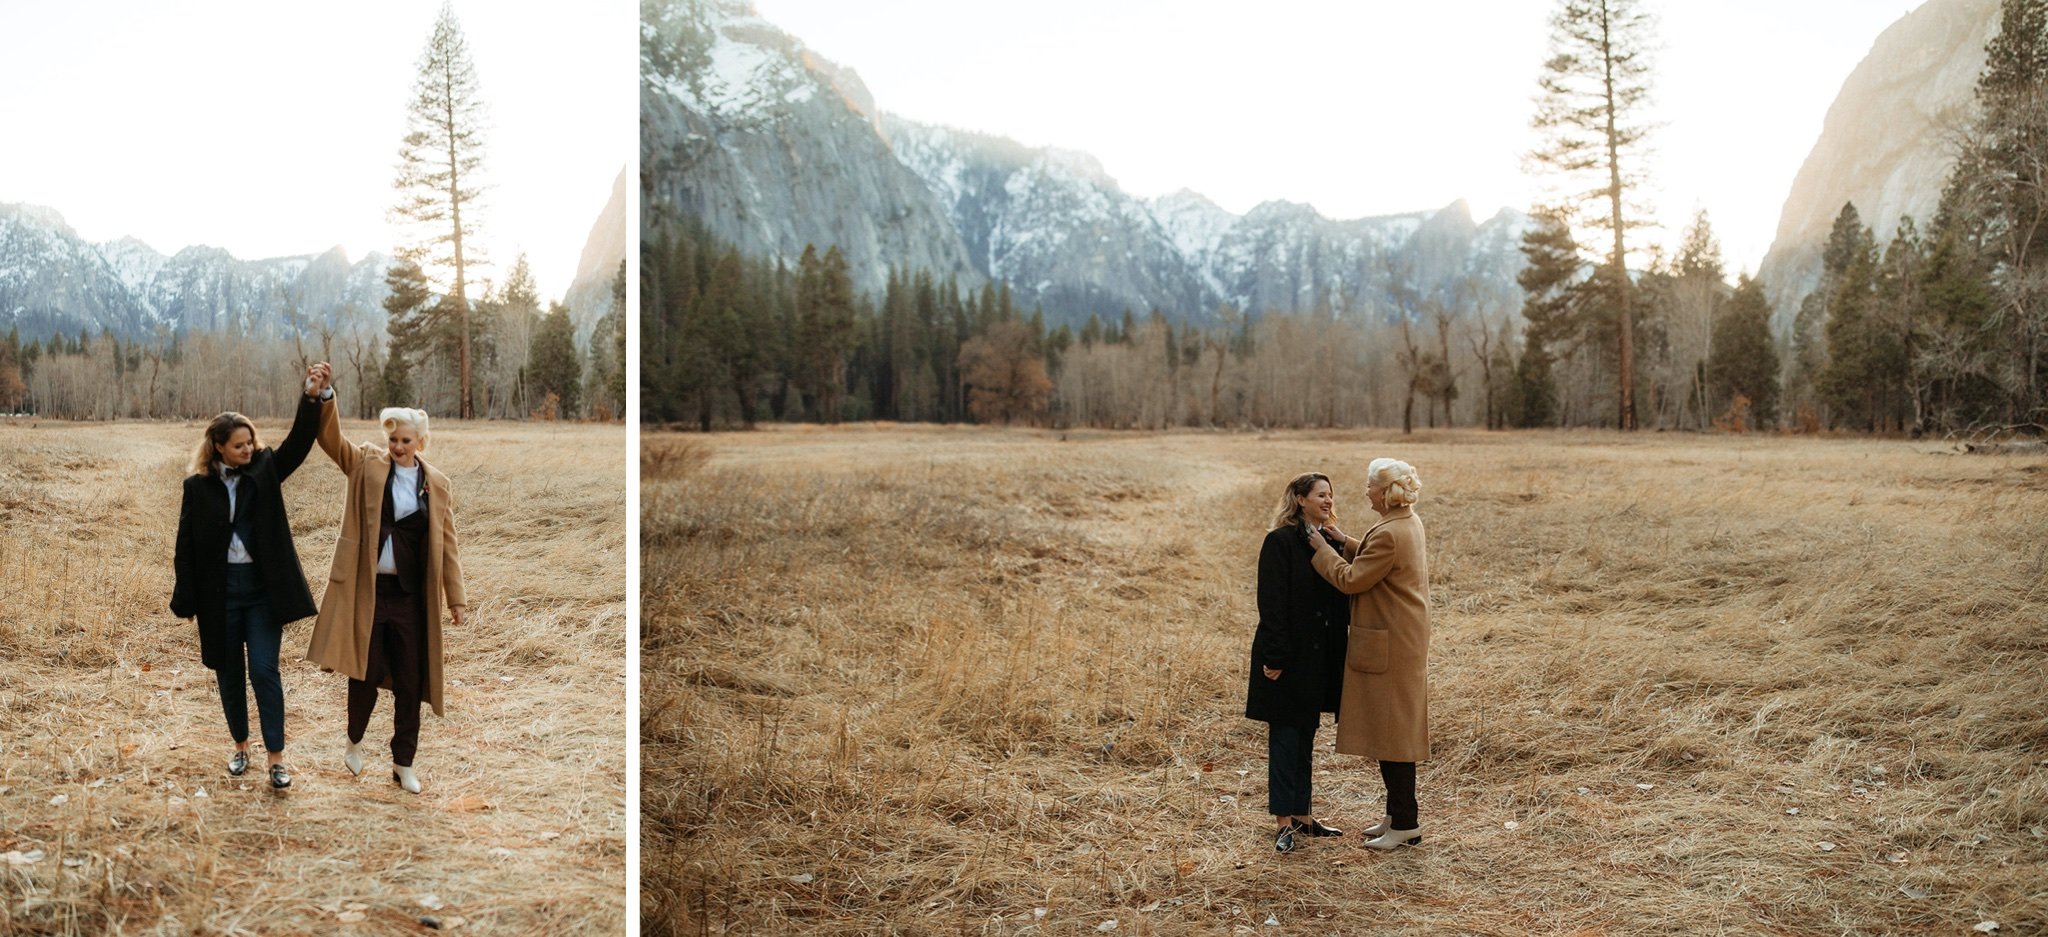 LGBT-Yosemite-National-Park-Elopement-with-Two-Brides-Will-Khoury-Elopement-Photographer_62.jpg